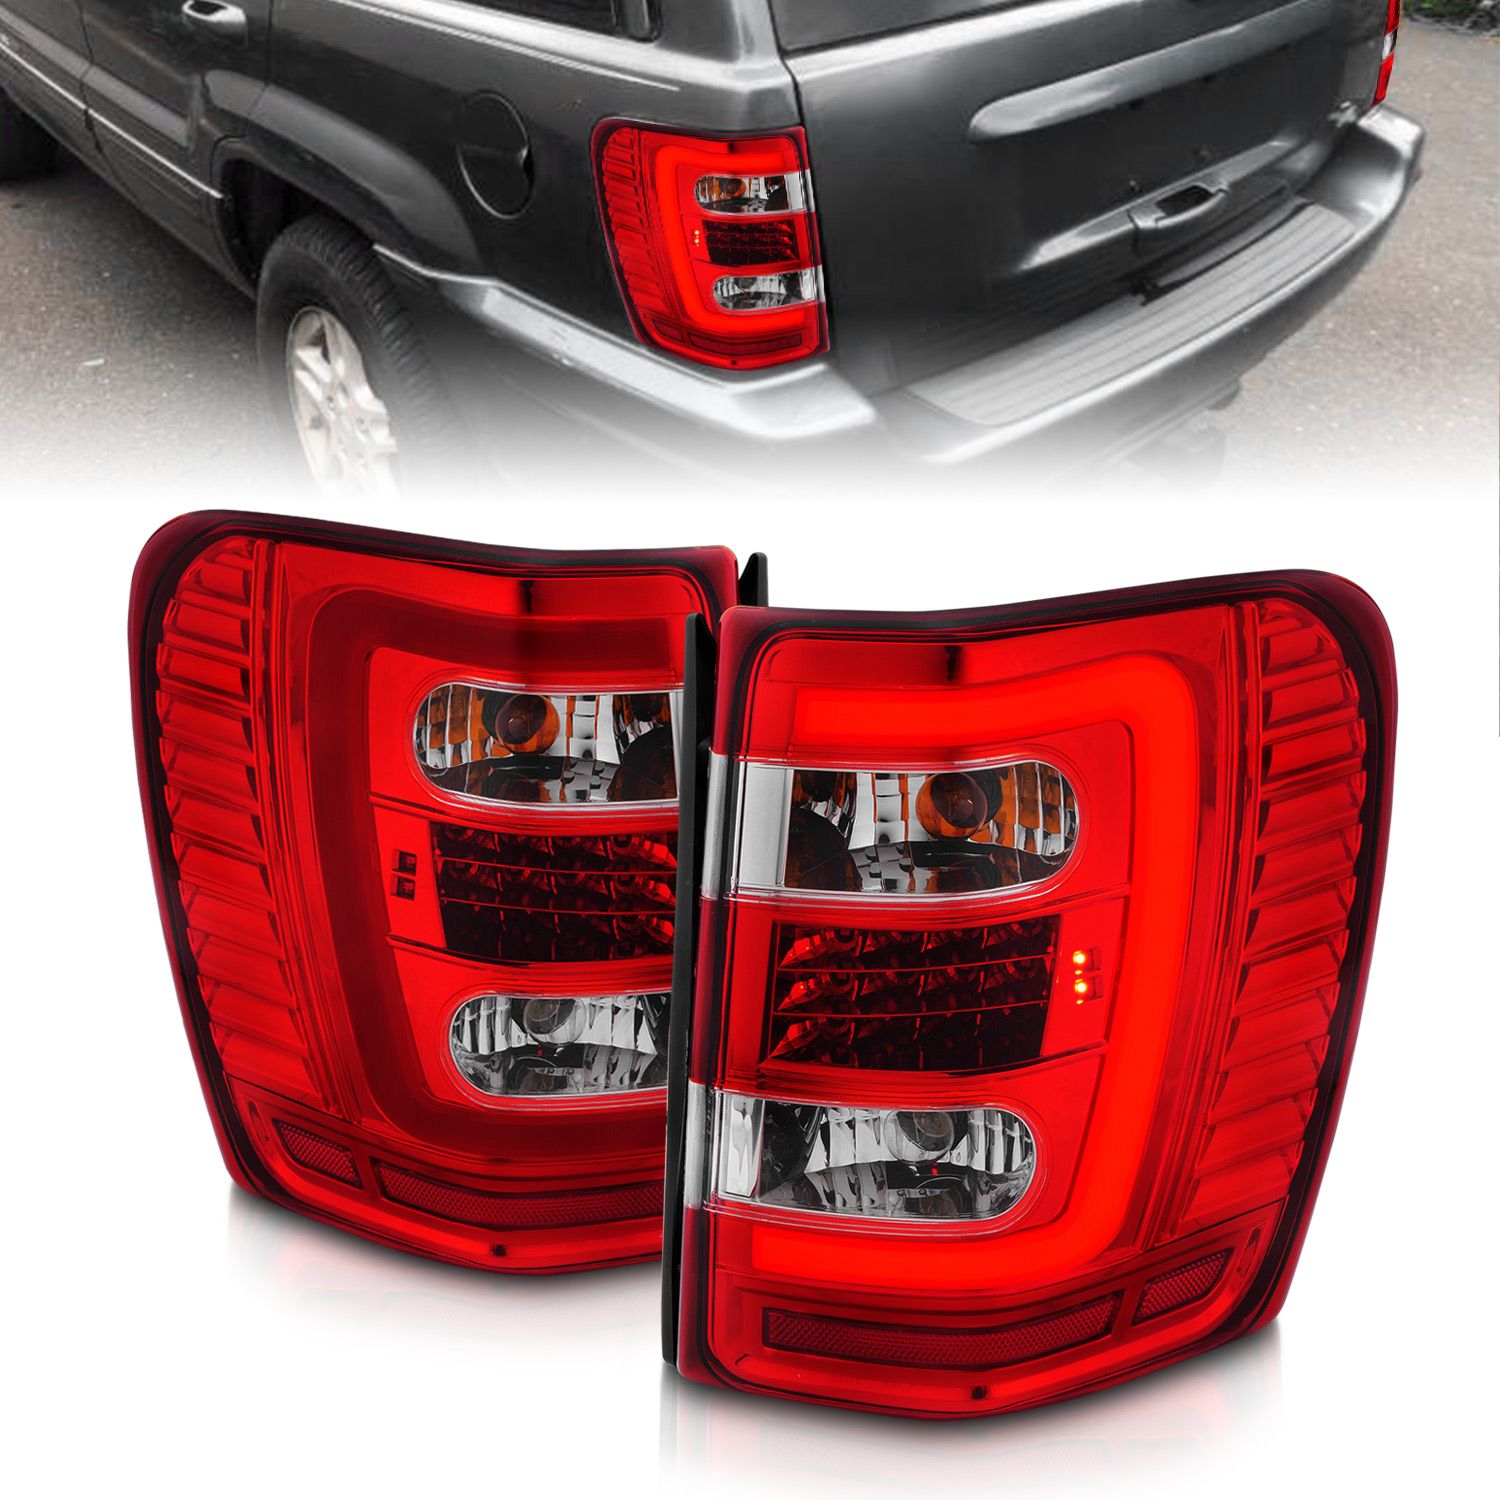 1999-2004 JEEP GRAND CHEROKEE LED TAIL LIGHTS RED CLEAR LENS W/ CHROME HOUSING C LIGHT BAR